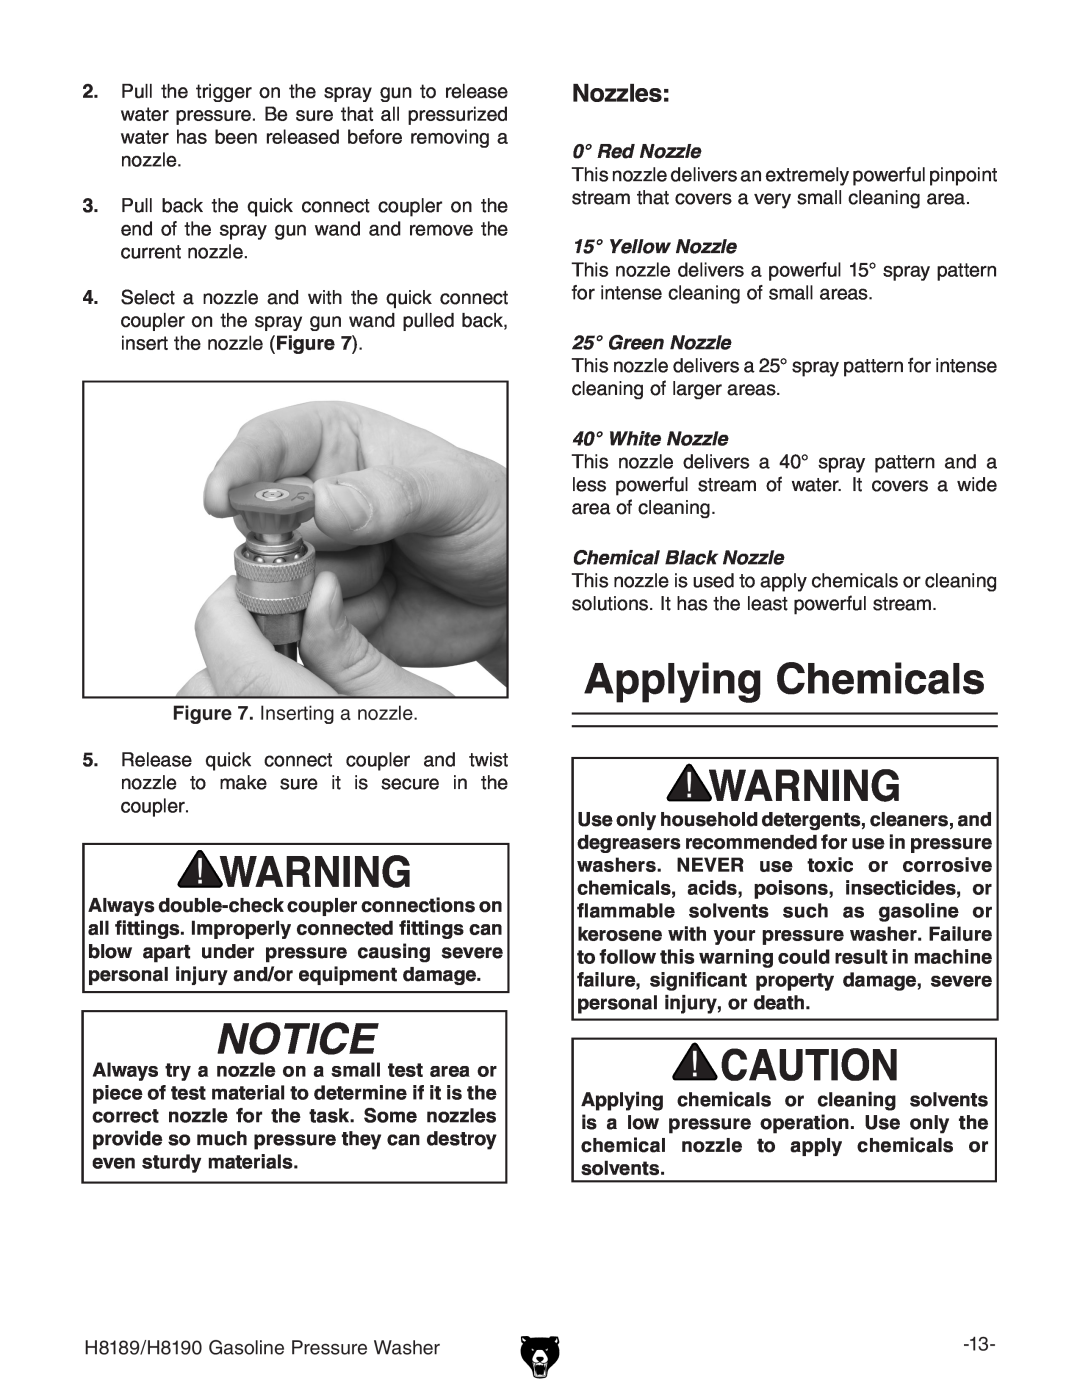 Grizzly H8189/H8190 owner manual Applying Chemicals, Notice, Nozzles 